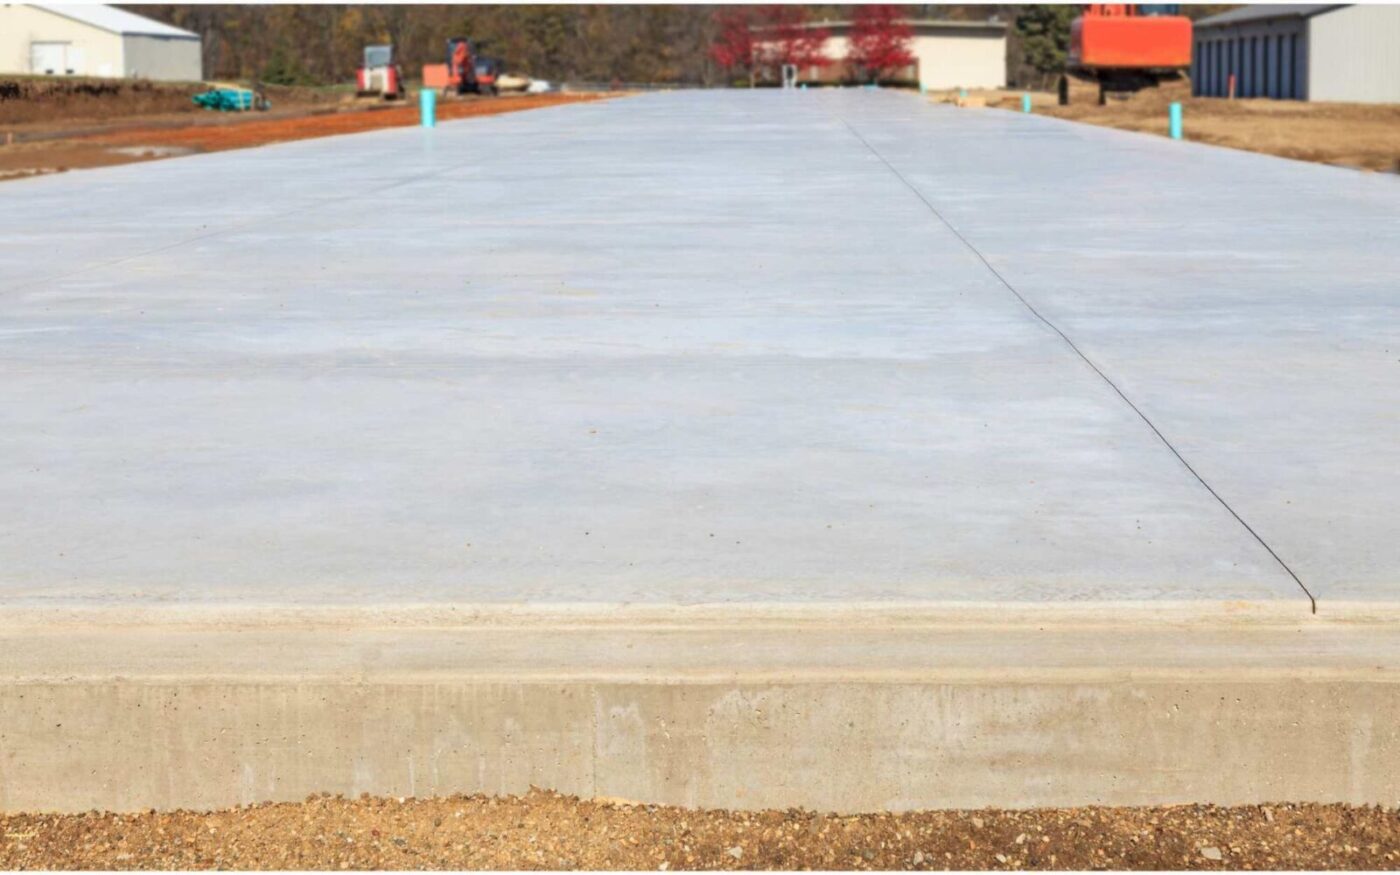 A newly constructed, smooth concrete slab stretches into the distance on a construction site by Naples Concrete Solutions. There are some blue pipes protruding from the surface, and construction equipment can be seen in the background among soil and gravel areas. Contact us for a free quote from our expert concrete contractors today!